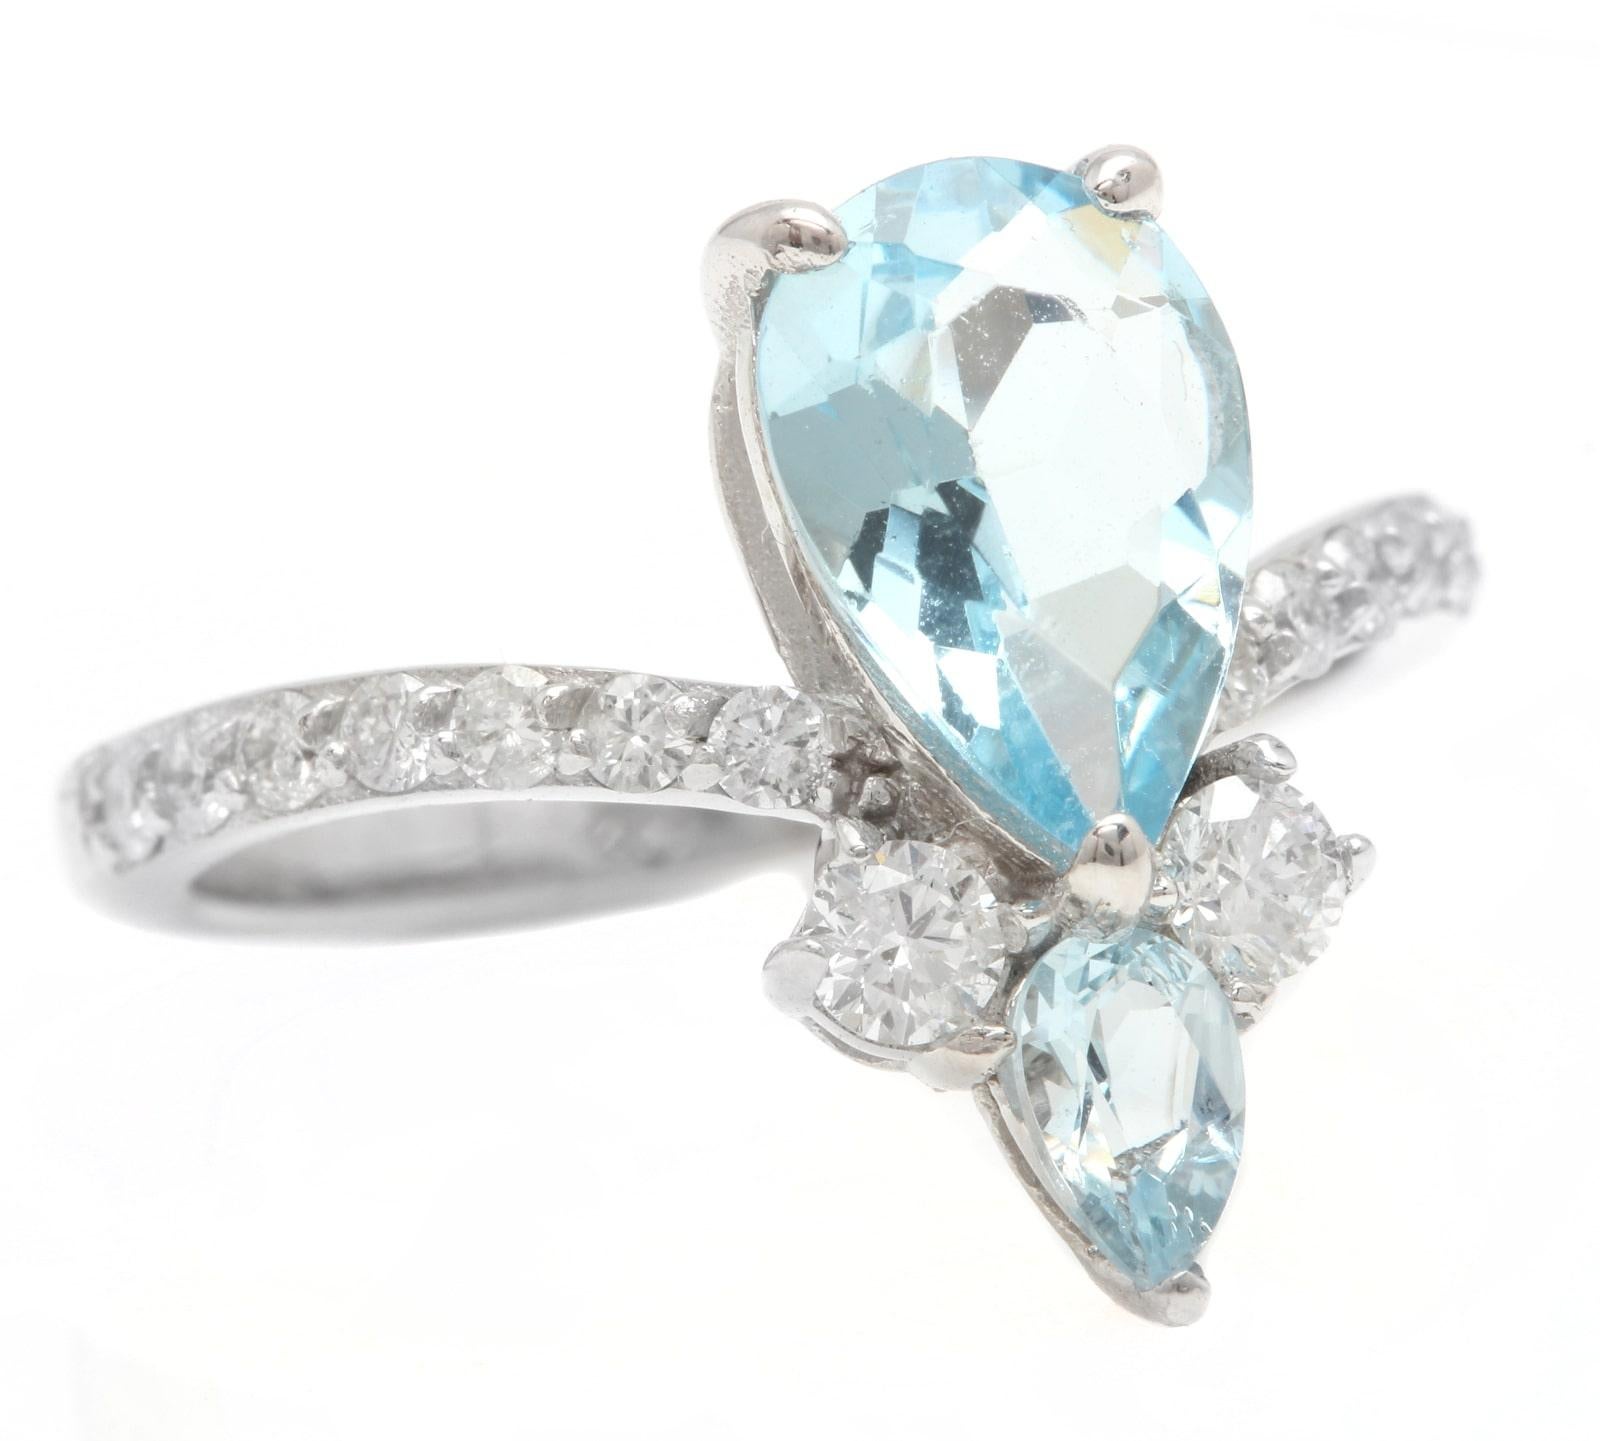 1.75 Carats Natural Aquamarine and Diamond 14K Solid White Gold Ring

Suggested Replacement Value $5,000.00

Total Natural Aquamarine Weight is: Approx. 1.50 Carats 

Center Aquamarine Measures: Approx. 9.70 x 7.00mm

Natural Round Diamonds Weight: